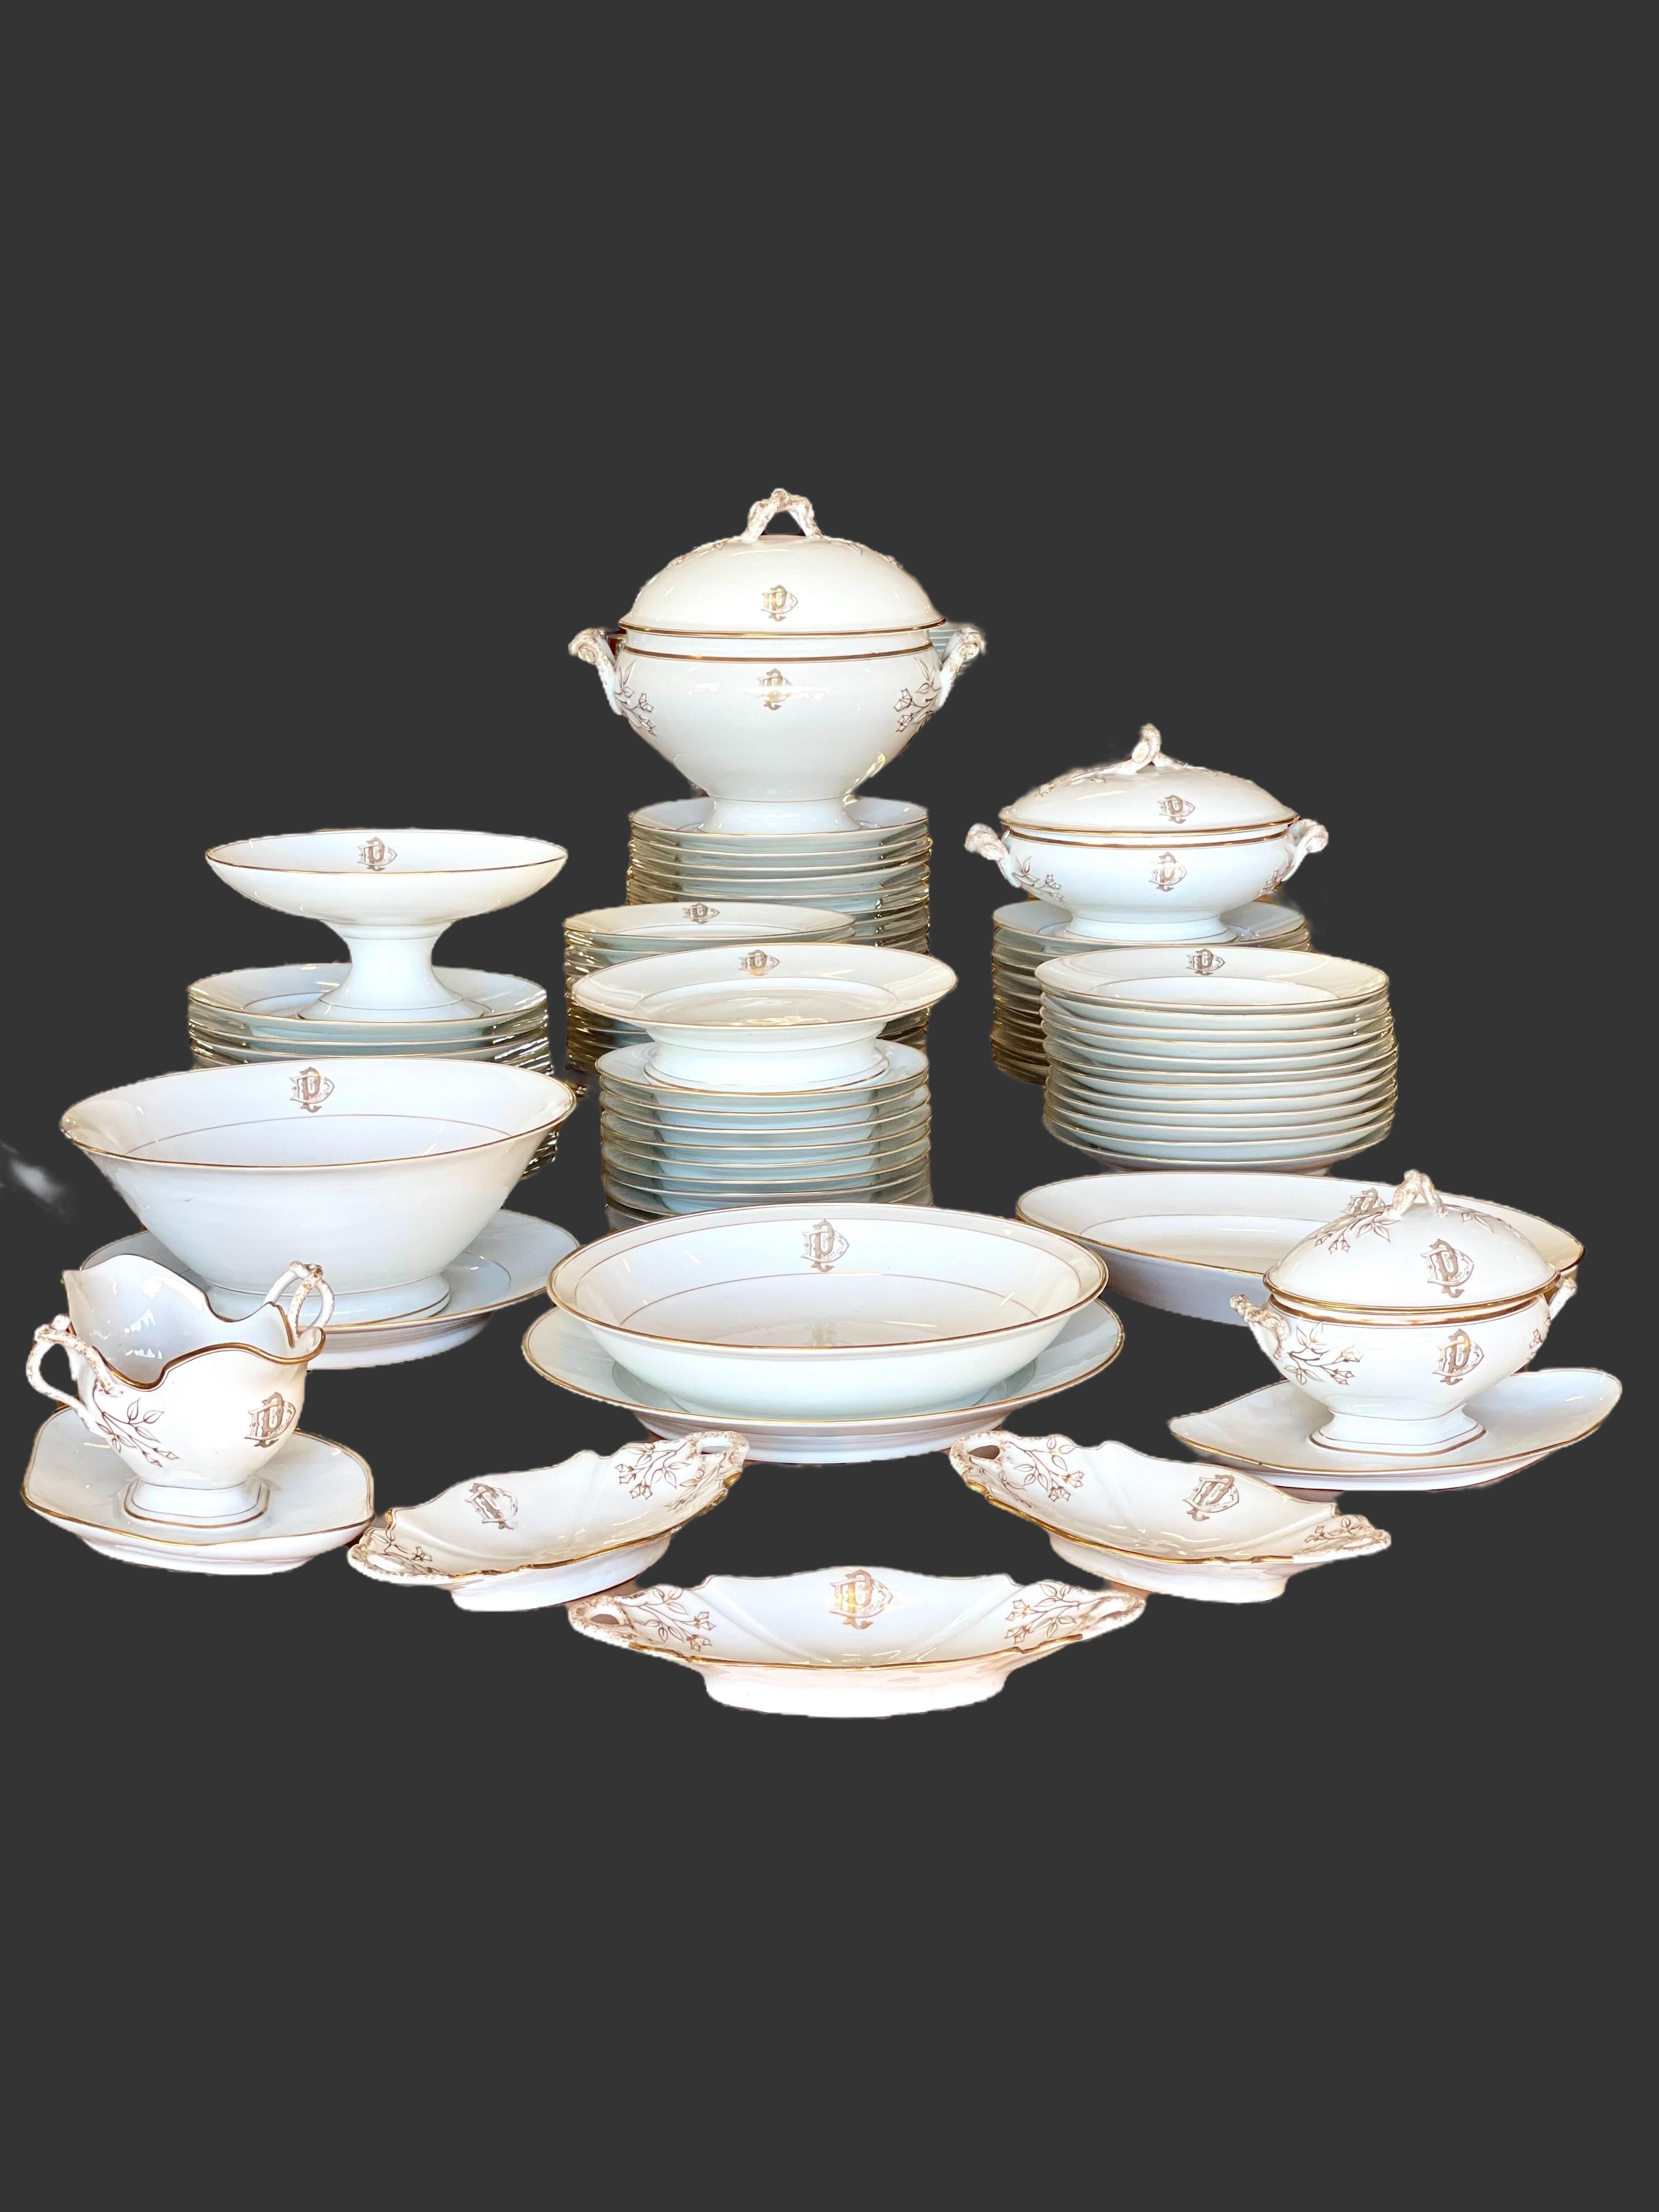 Limoges Porcelain Set of 50 Piece Dinner Service with Gilt Edges and Monogramme For Sale 5